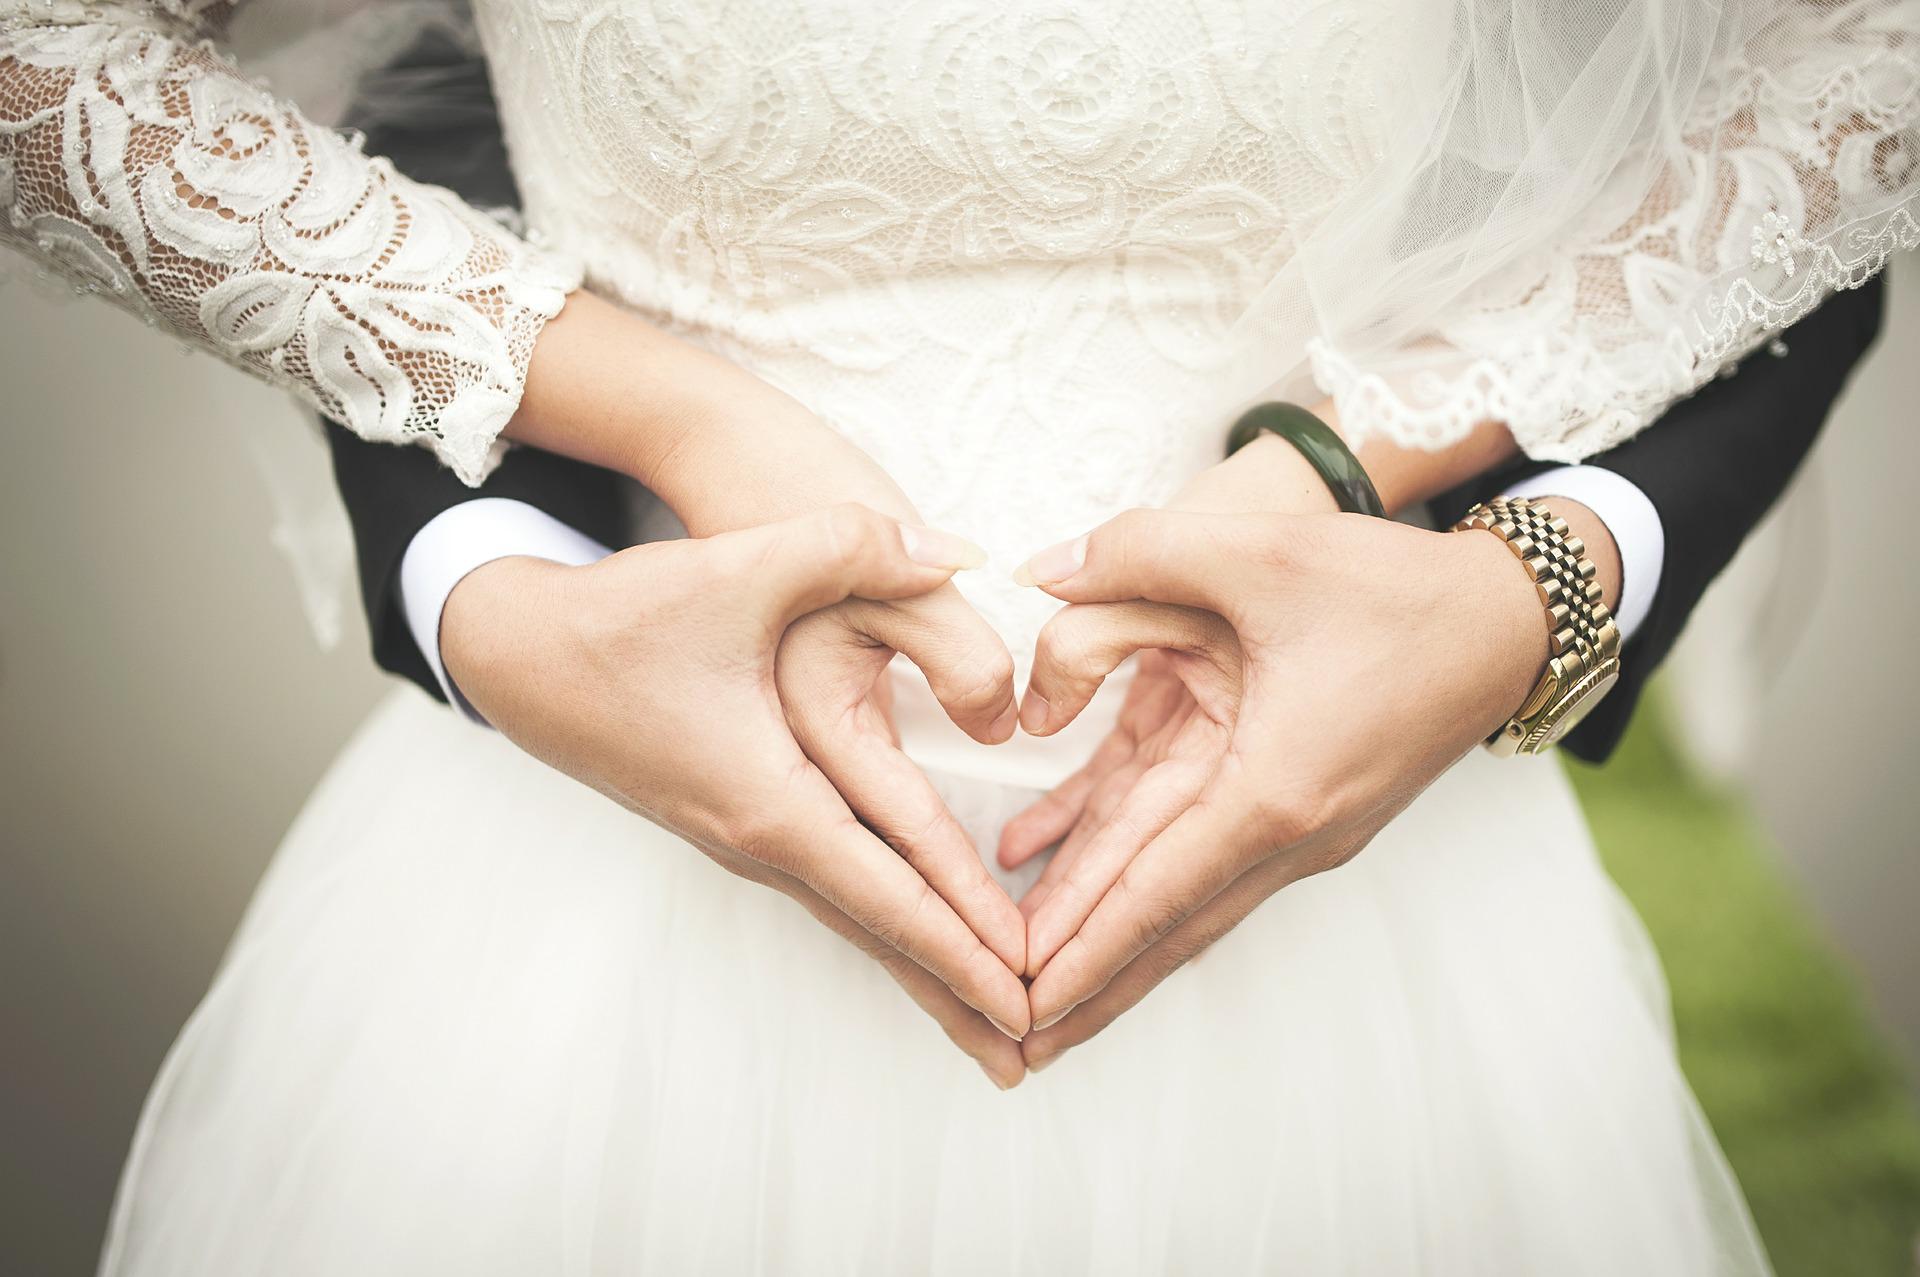 Minimum marriage age rises to 18 in England and Wales, family law sector reacts